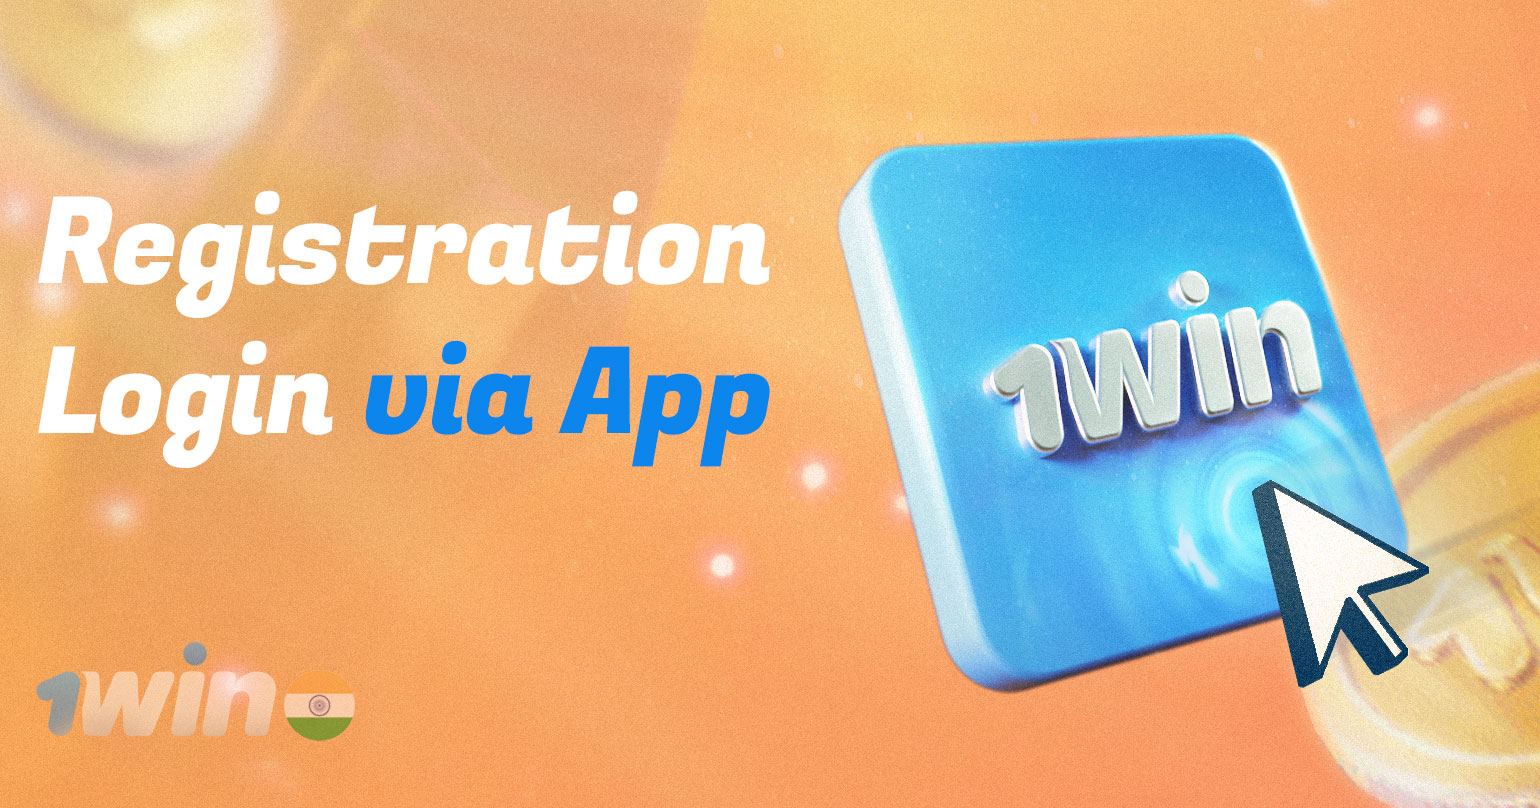 The easiest way to create a new account via smartphone on the 1win platform.